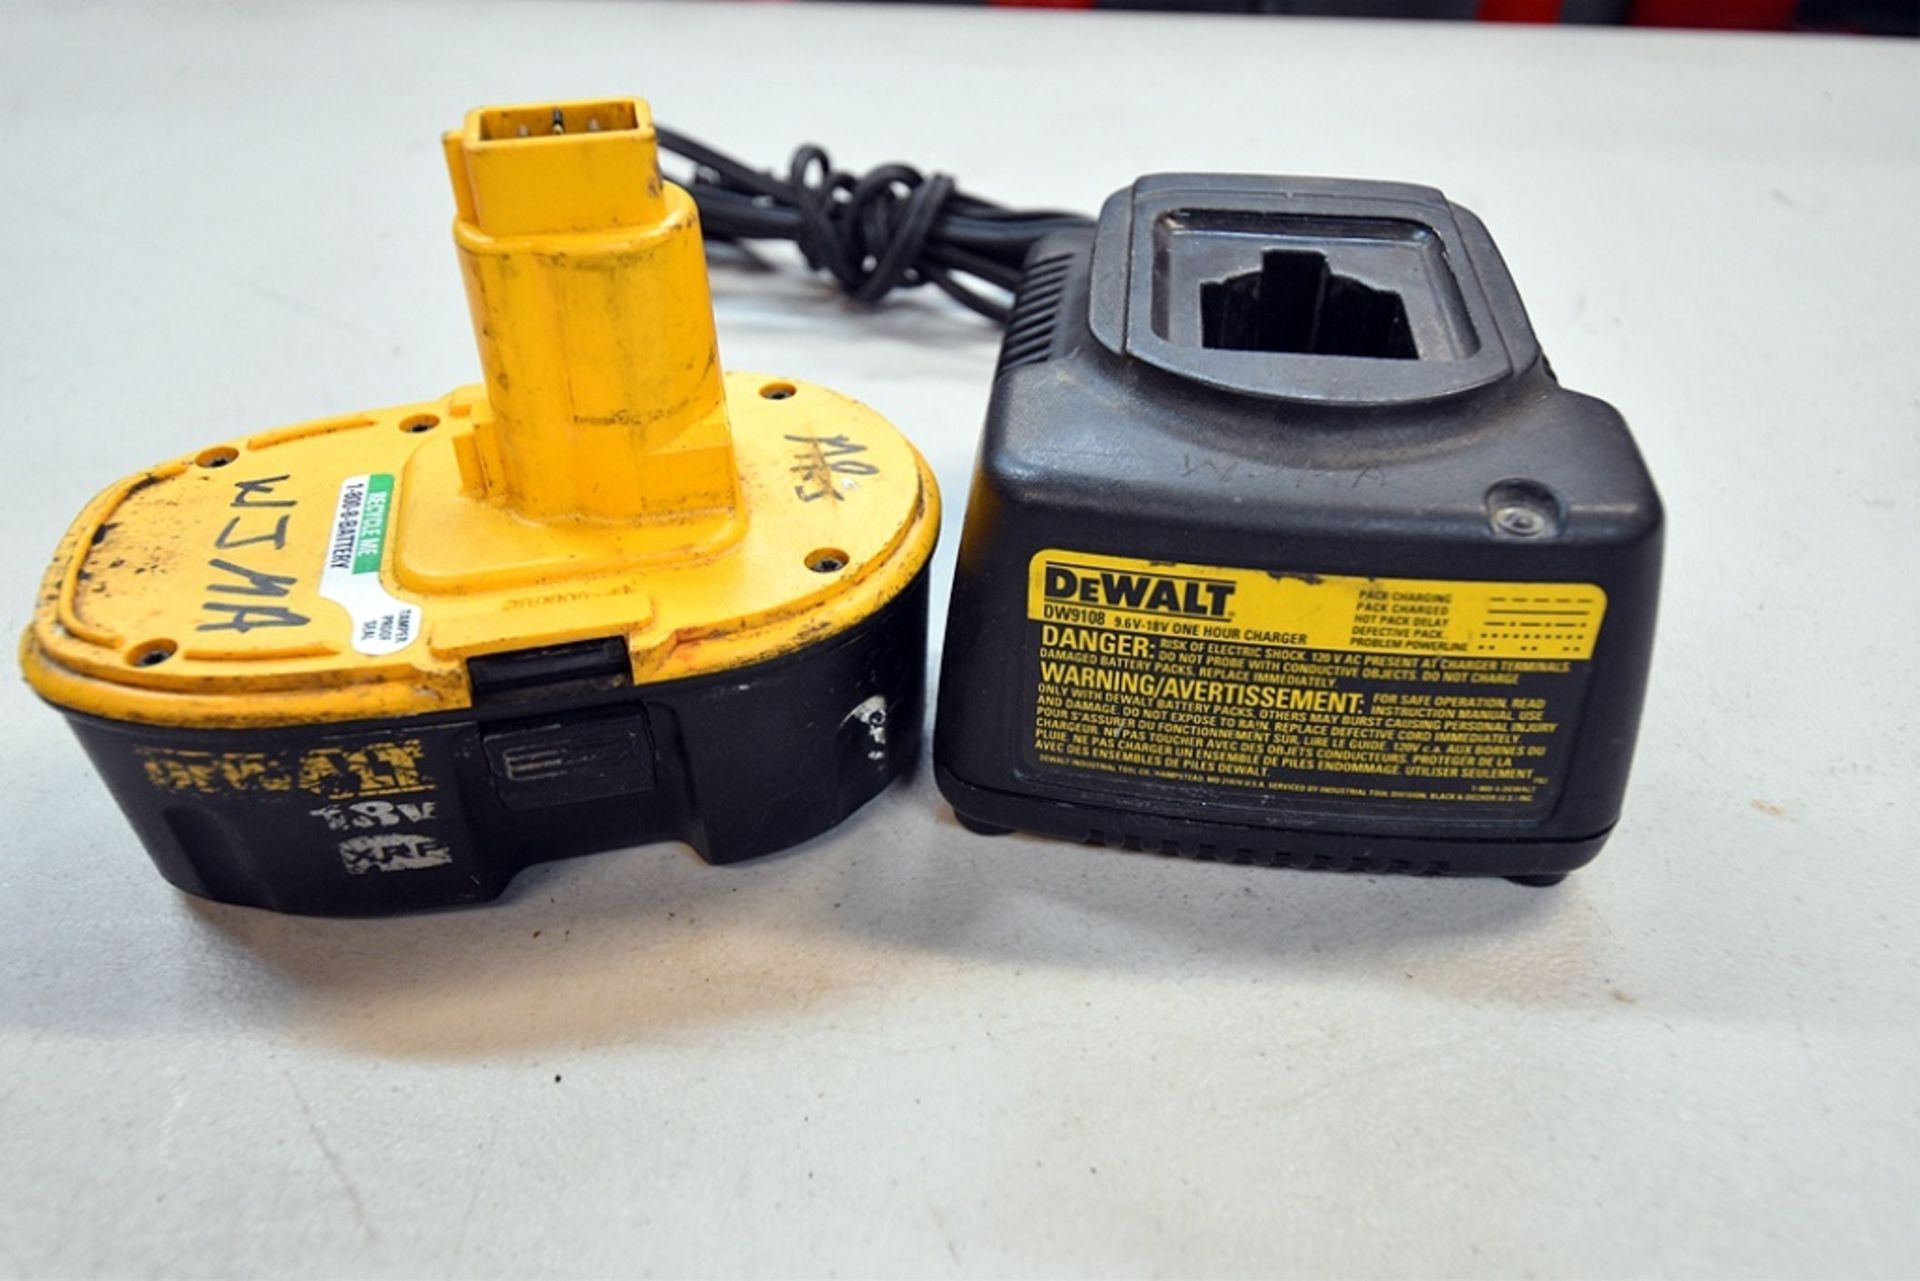 DeWalt DW938 Variable Speed Reciprocating Saw w/ (2) Batteries and (1) Charger - Image 4 of 4